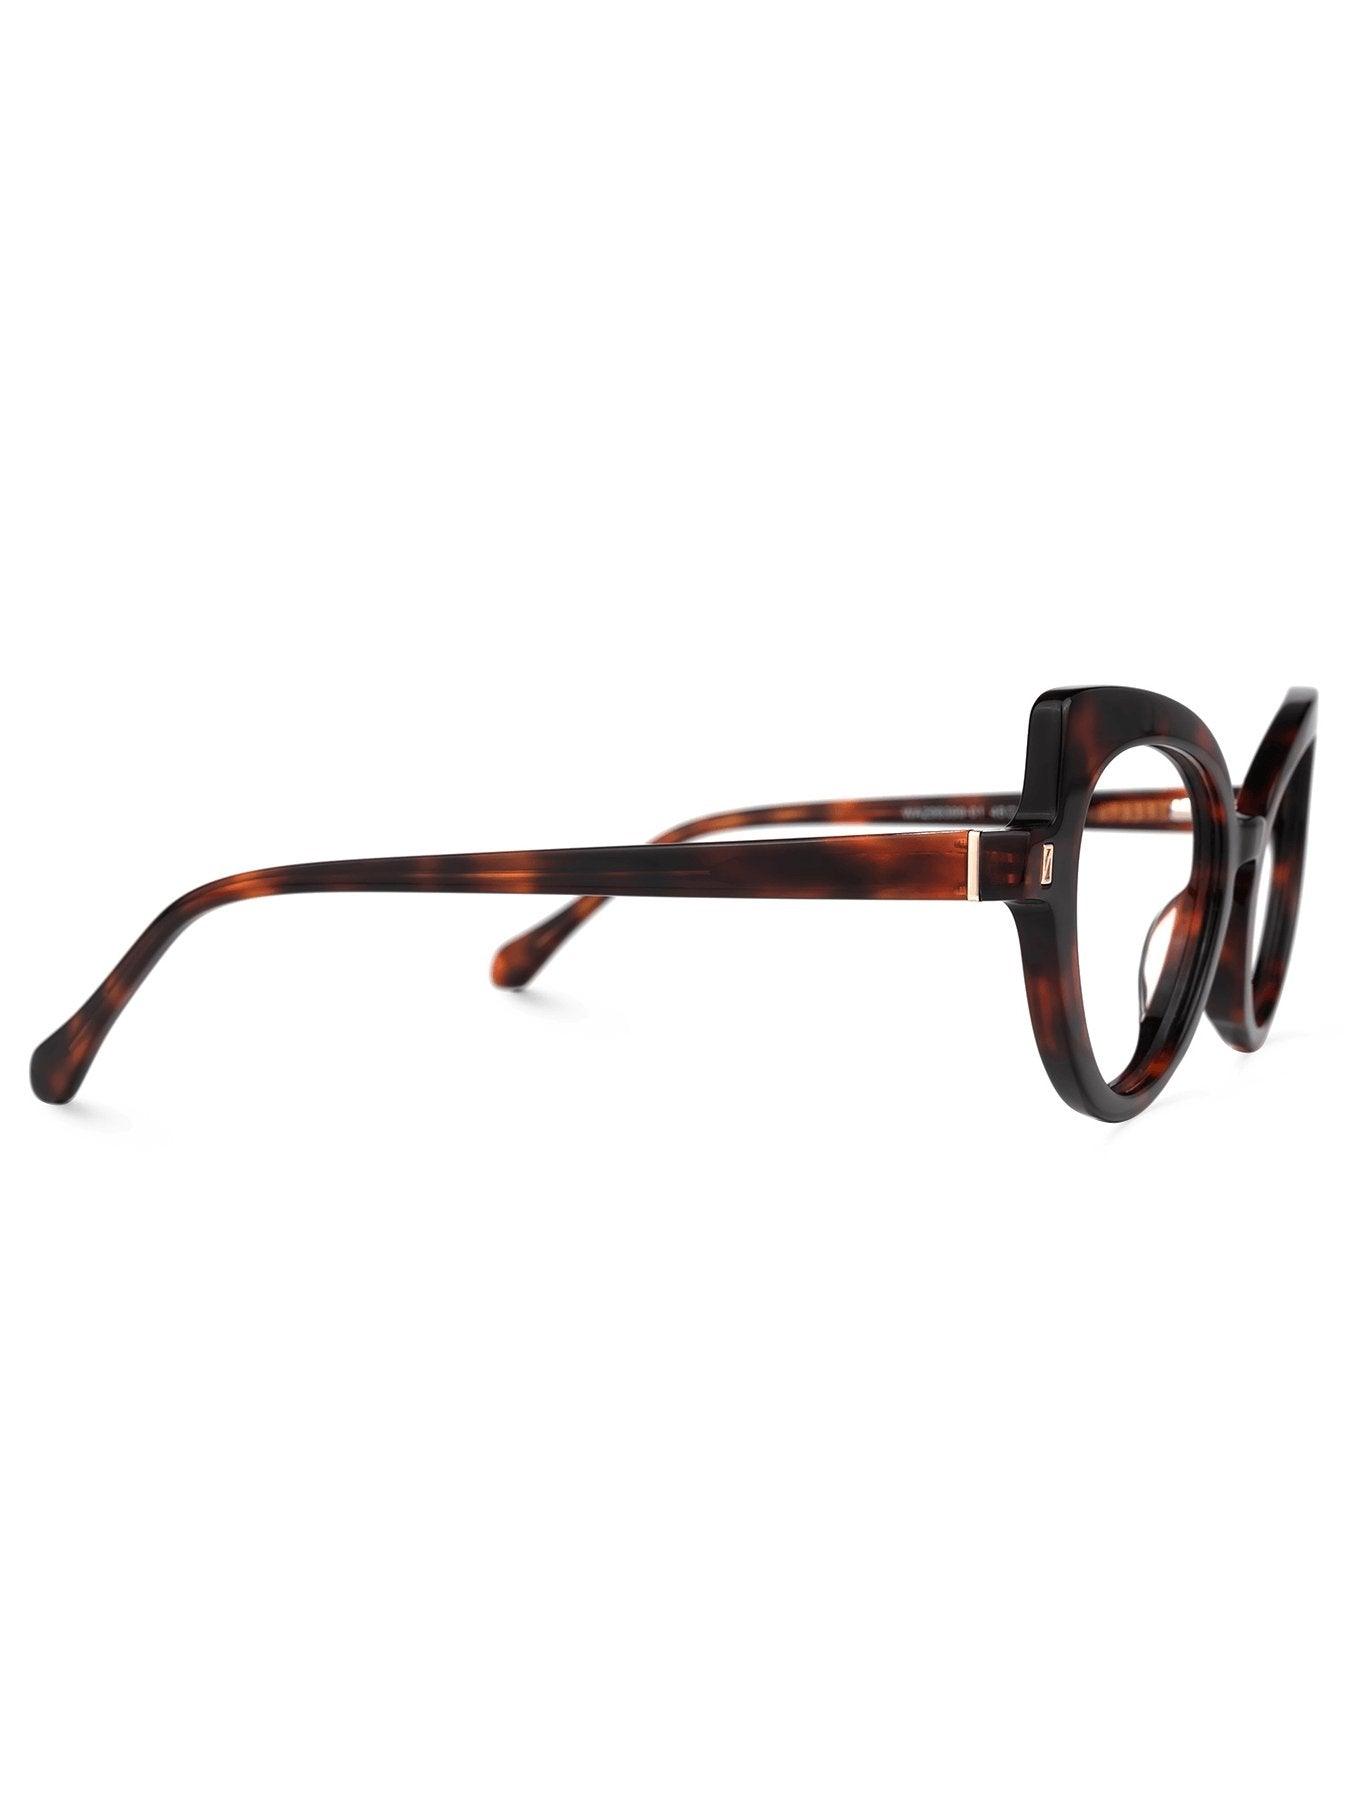 Cat Eye Acetate Frames Never Go Out Of Style